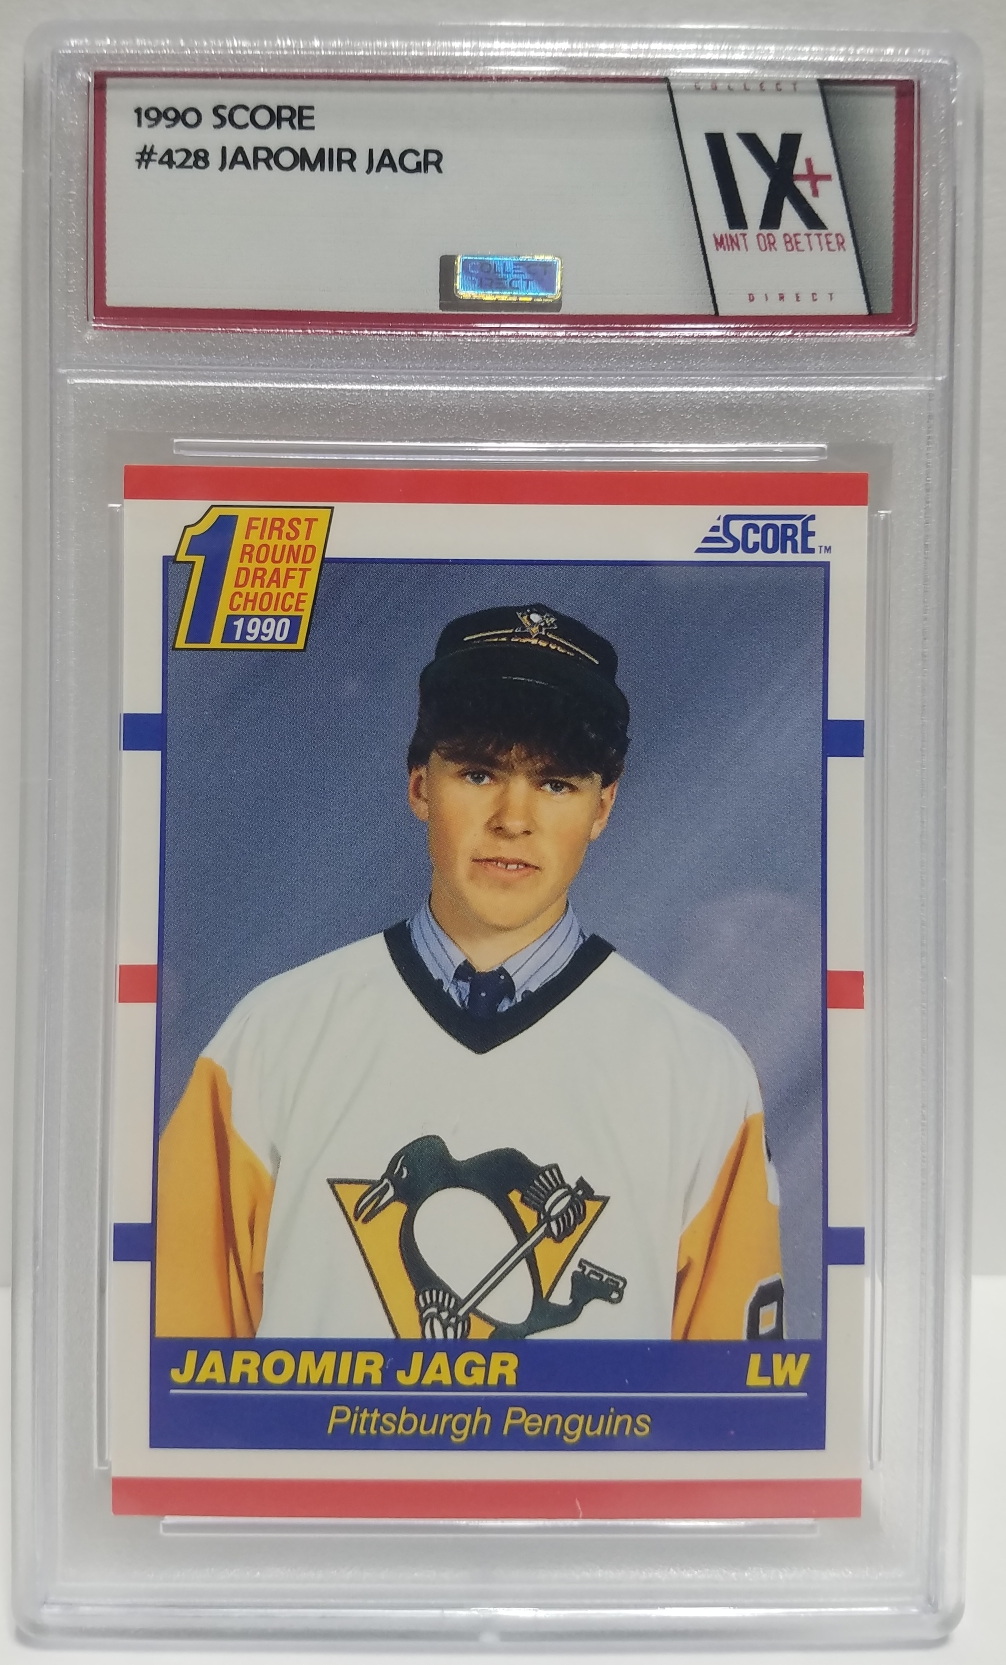 JAROMIR JAGR 1990 Score Rookie Card #428 Collect Direct Graded Mint or Better Pittsburgh Penguins ROOKIE CARD